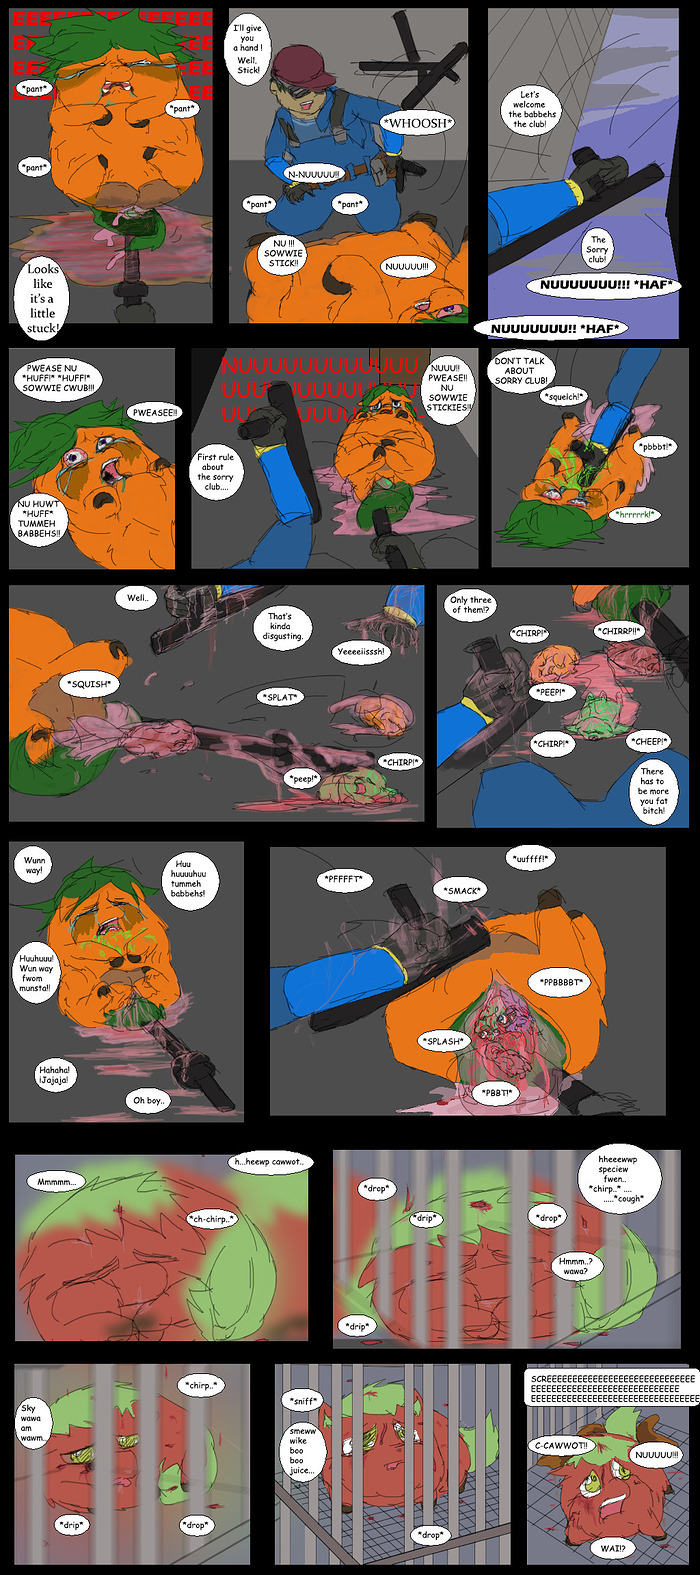 44954 - Carrot_By_Gr1m_1 abortion abuse artist_gr1m_1